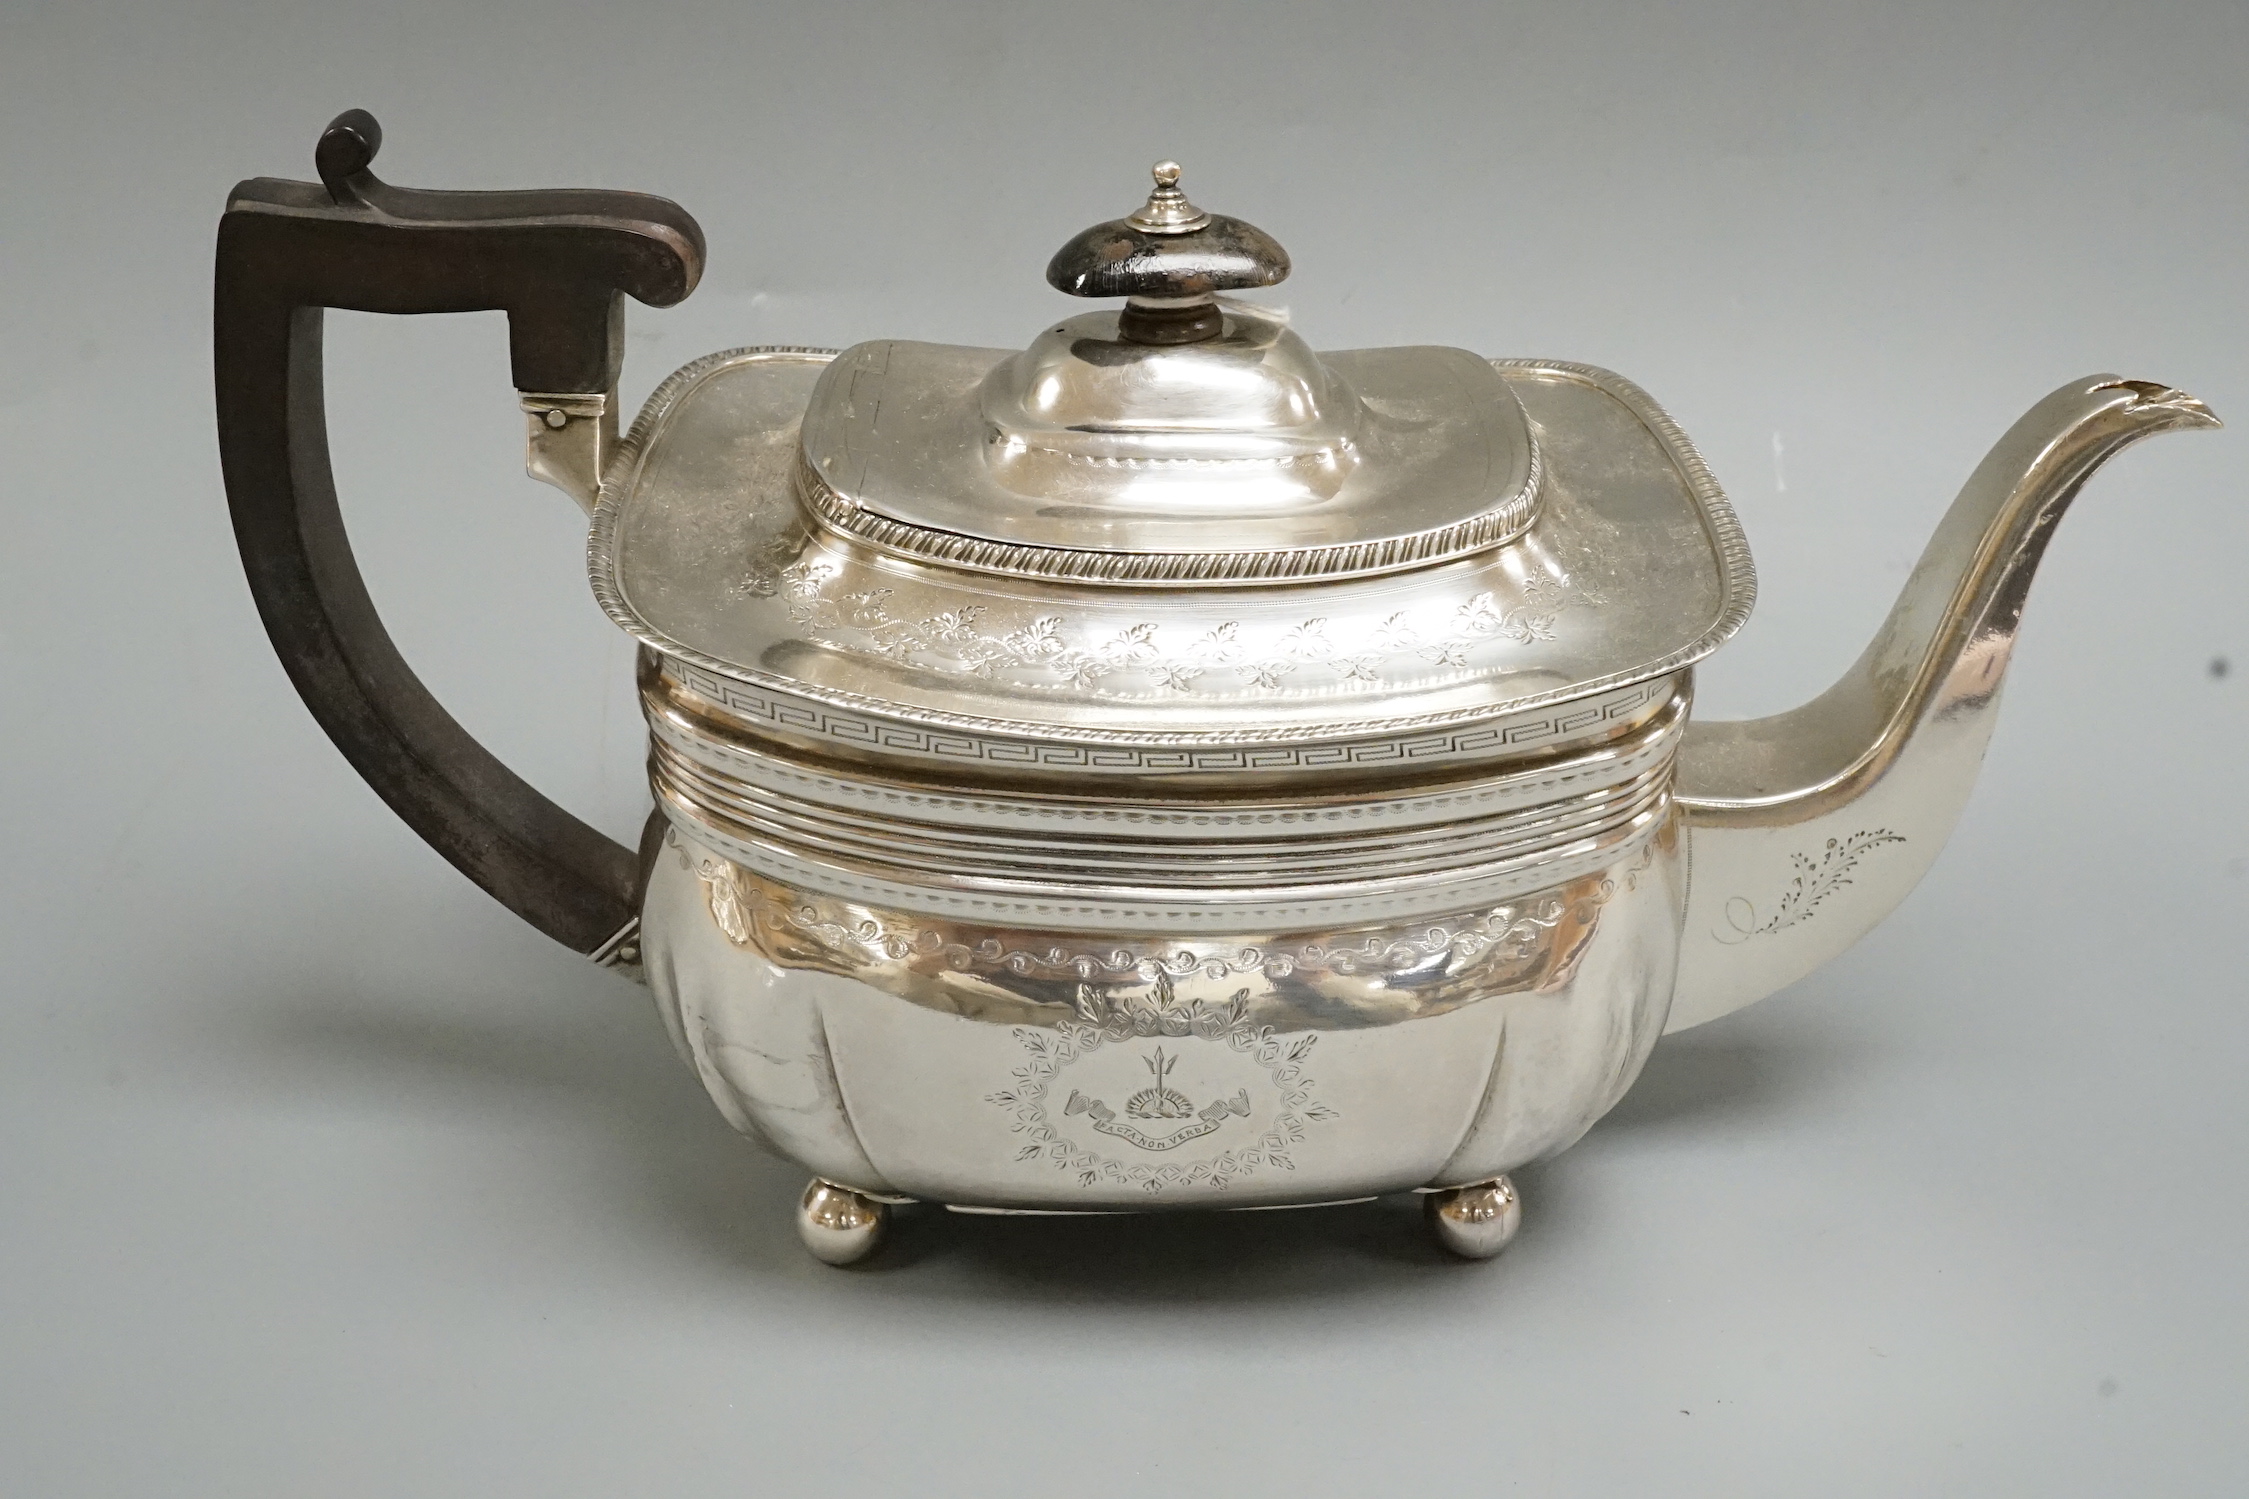 A George III chased silver teapot, by Peter & William Bateman, London, 1811, gross weight 20.1oz.